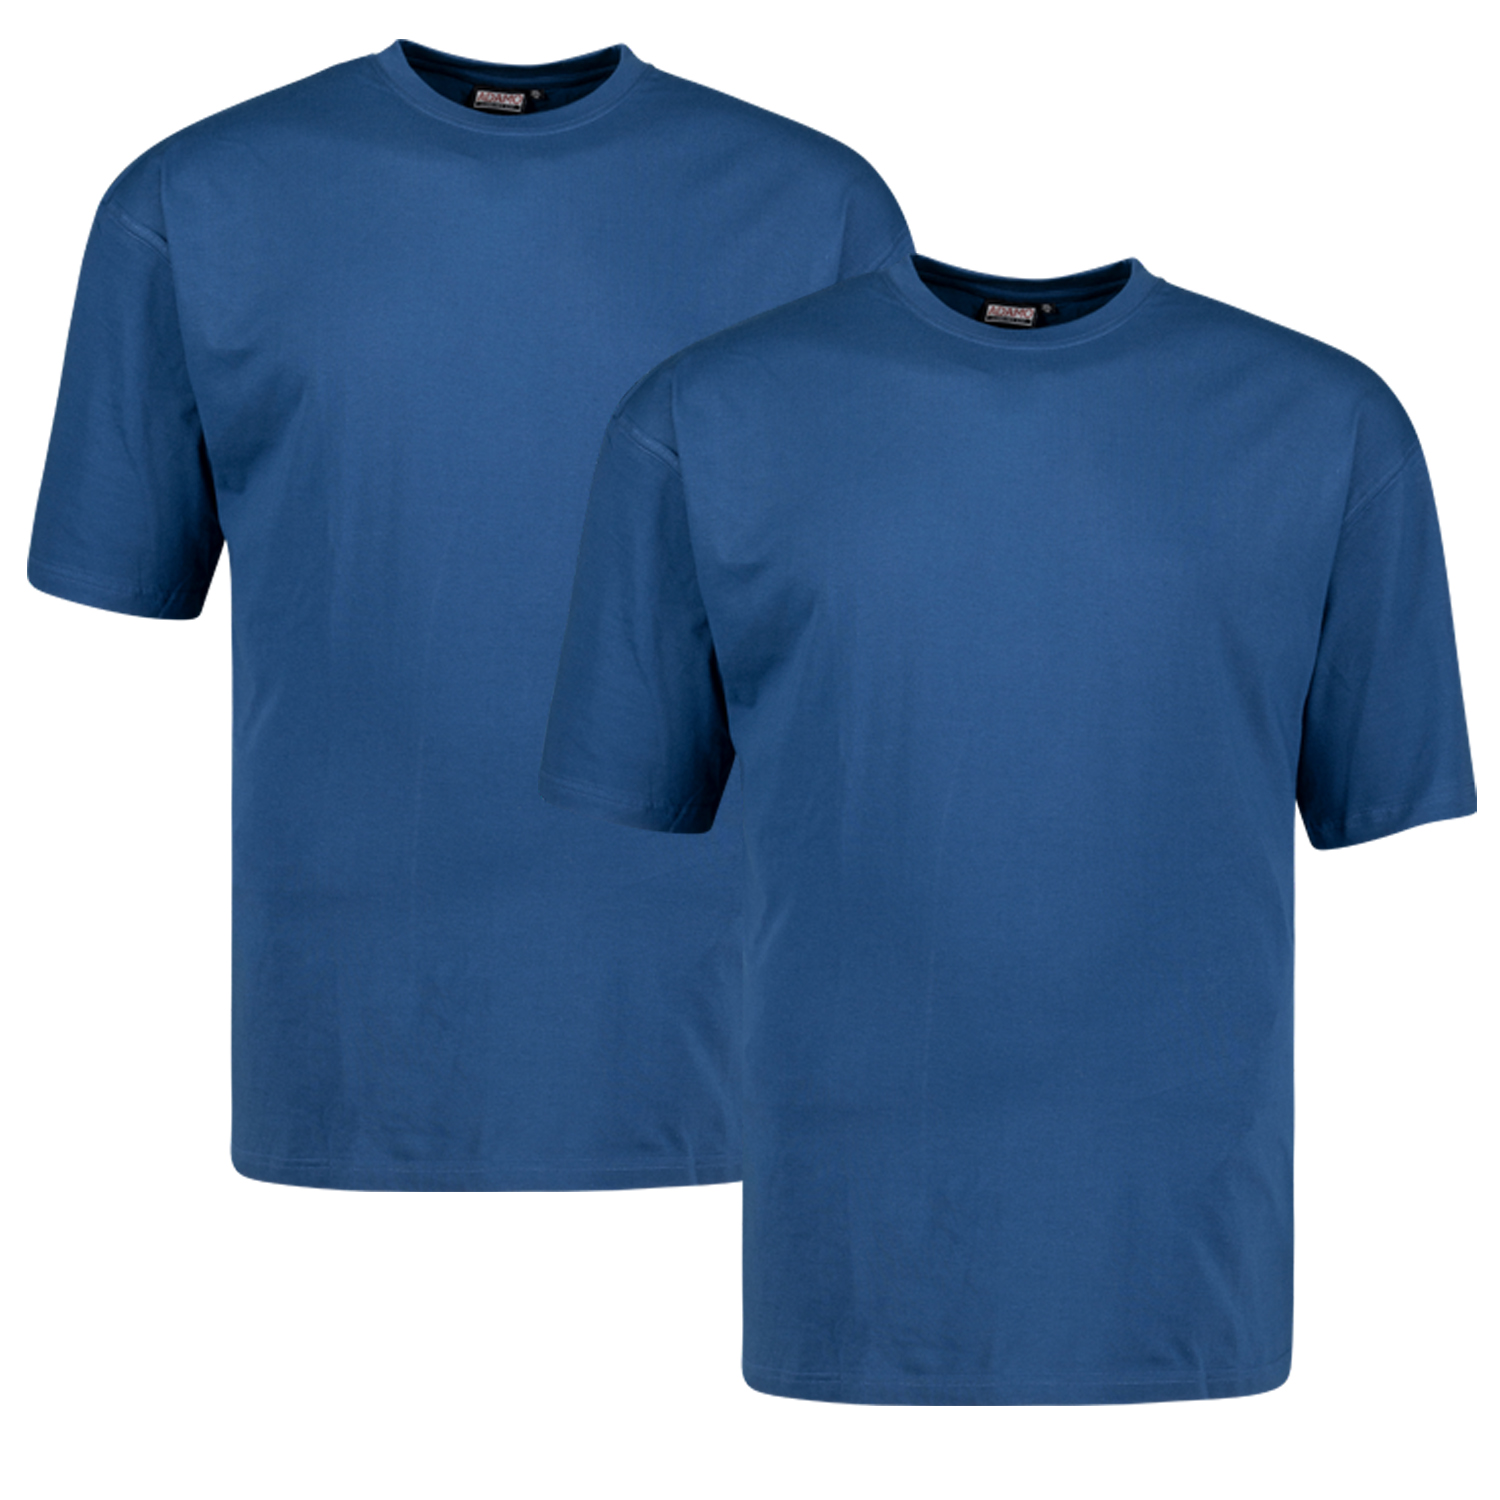 T-shirts in denim blue COMFORT FIT series Marlon by Adamo for men up to oversize 12XL - double pack